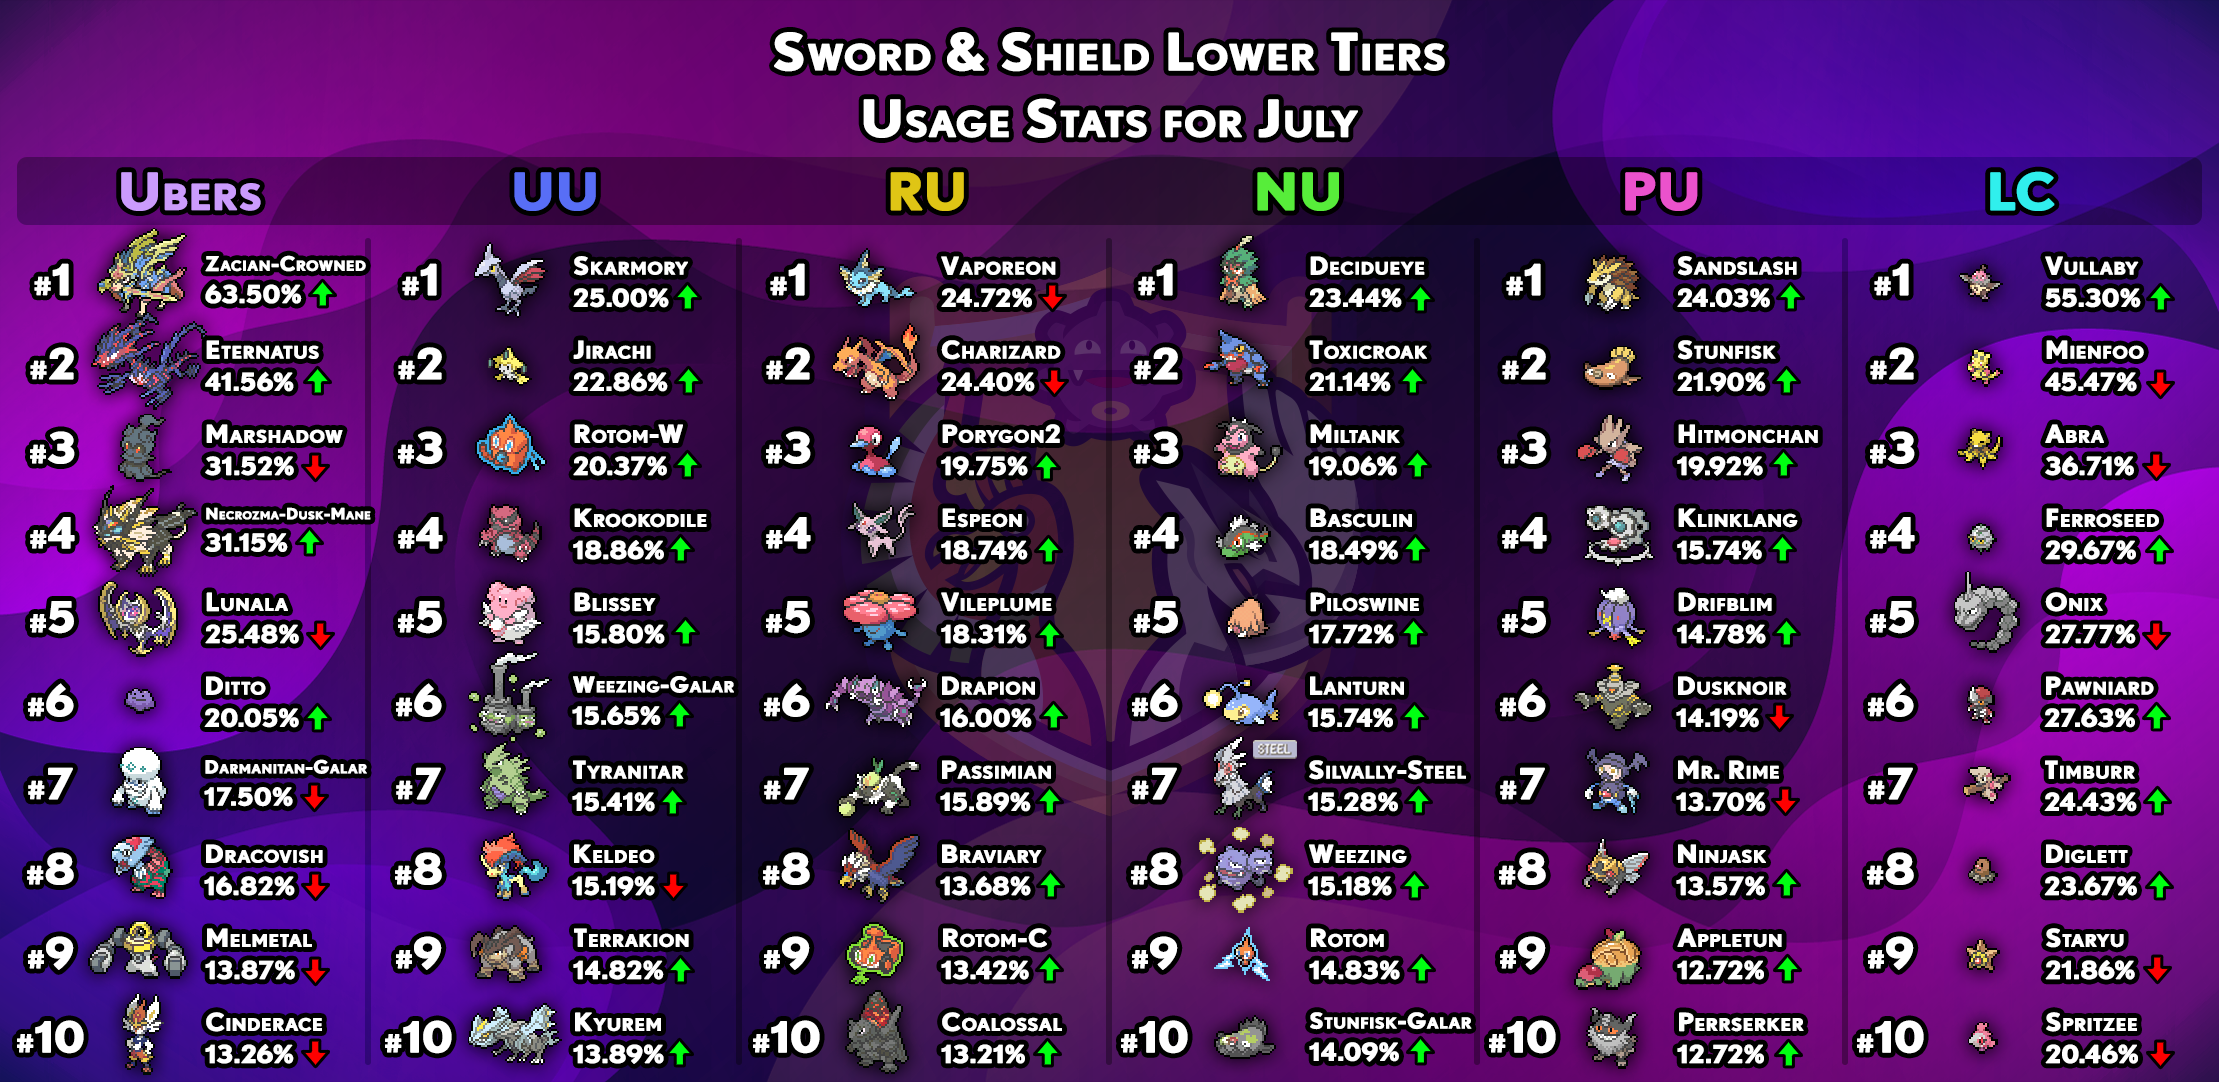 usagestats-gen8-other-tiers-july.png